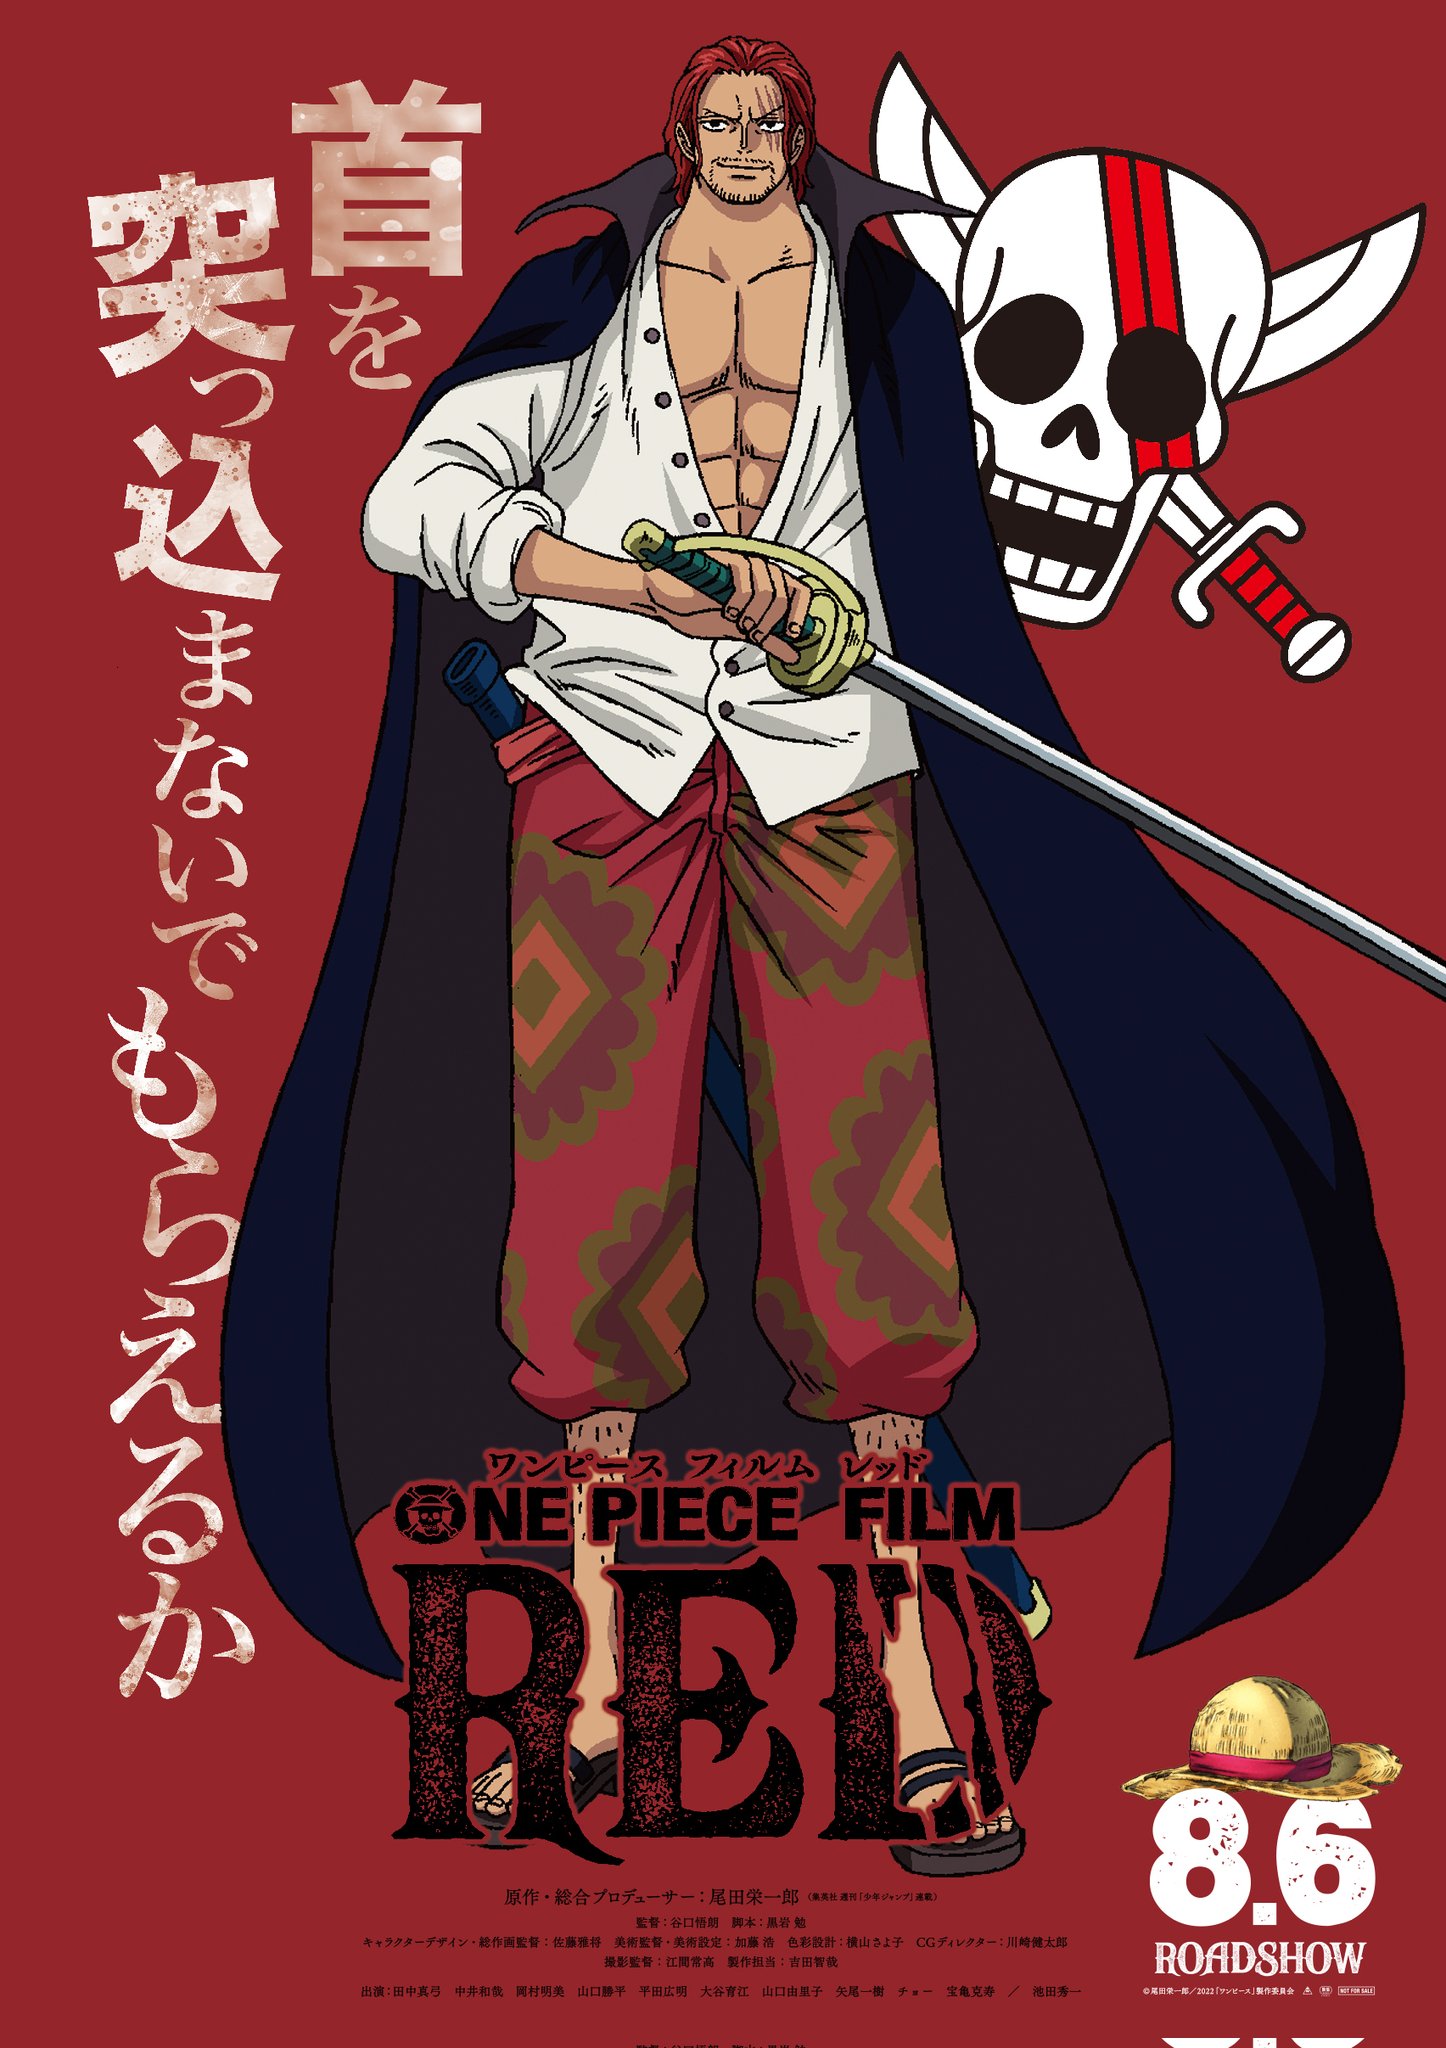 Is One Piece Red Canon?